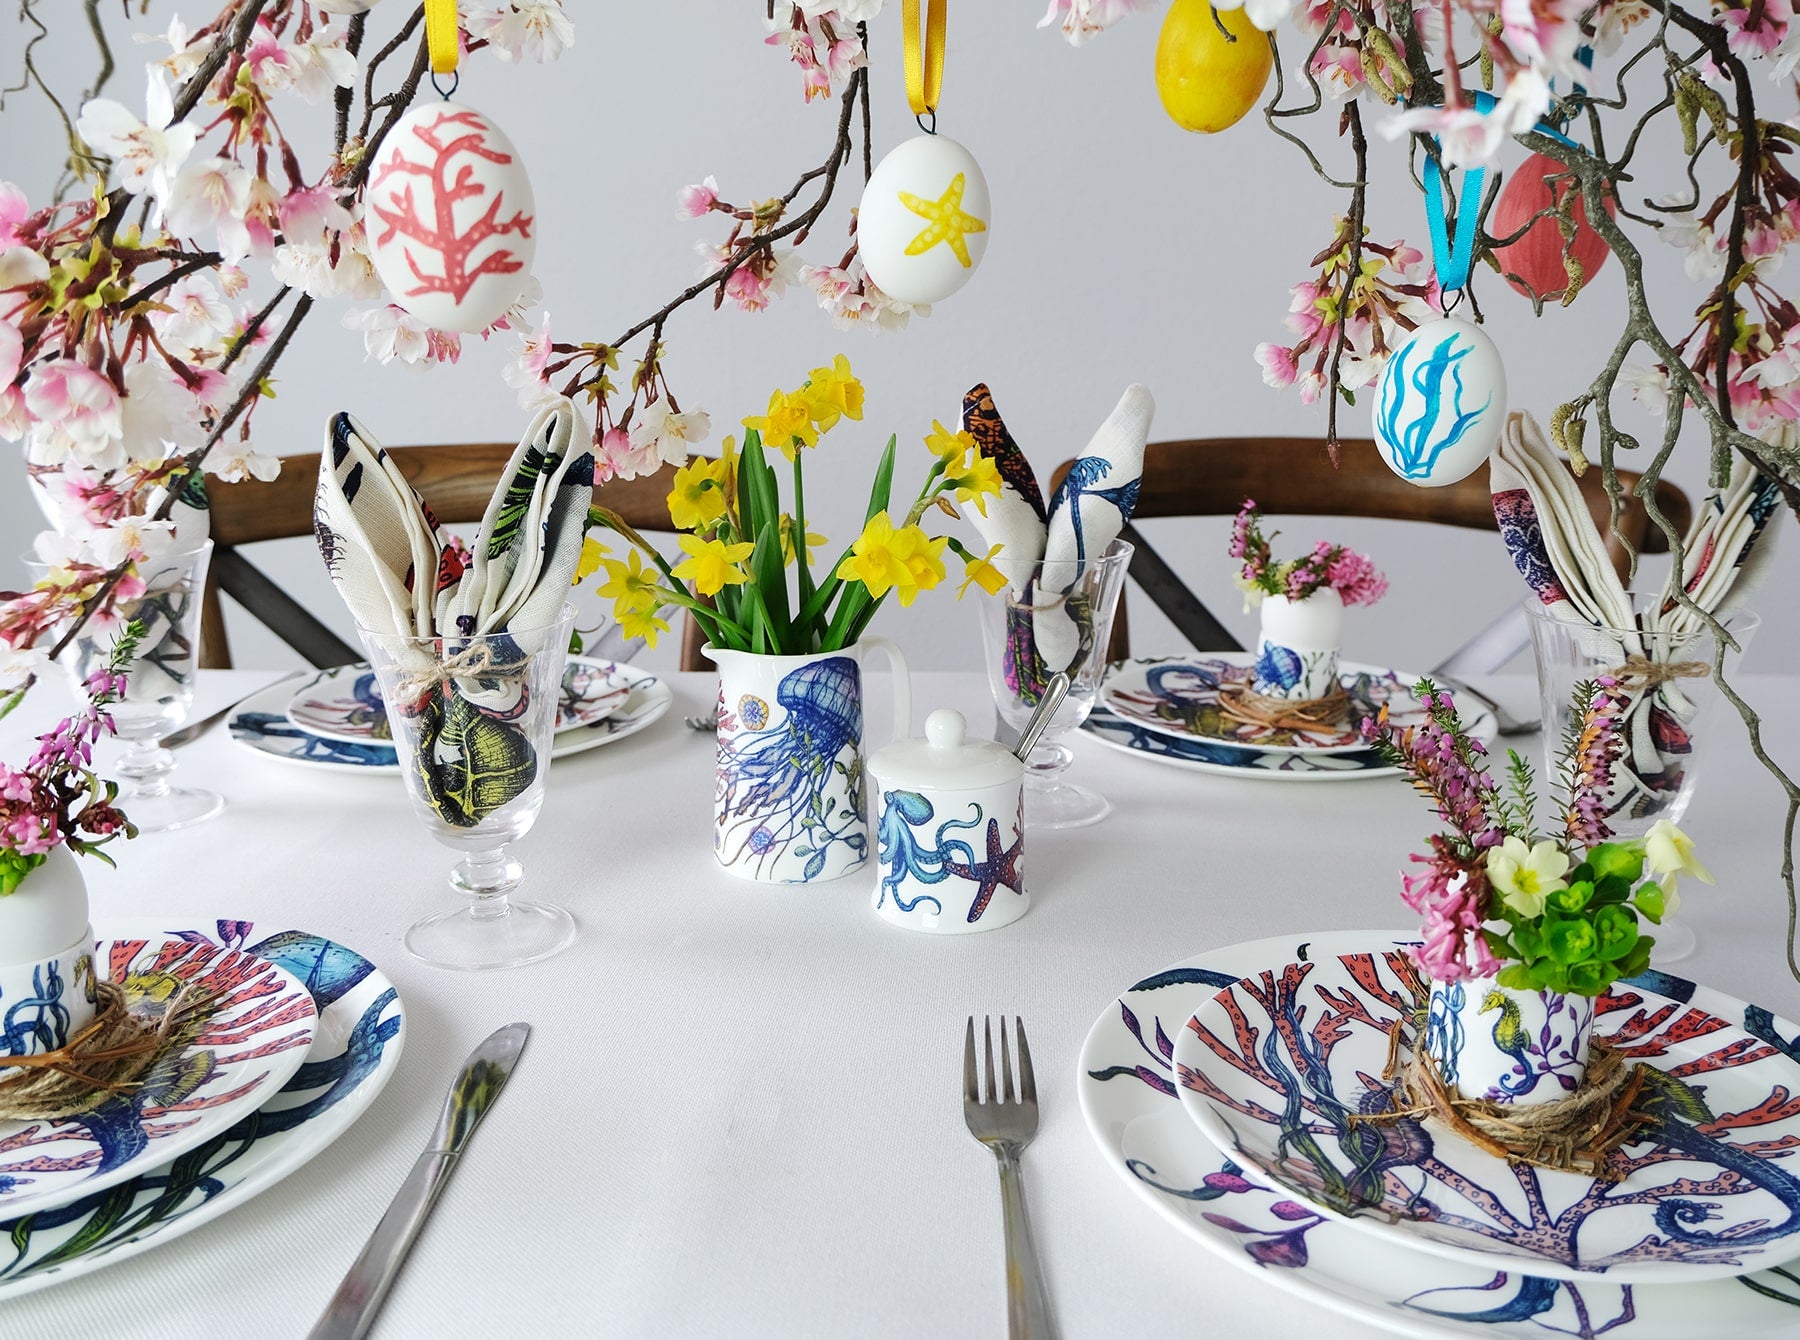 Table setting of the Reef tableware,each place has a Reef Dinner plate,side plate and an egg cup.Also on the table is a reef jug and a decorative birds nest,hanging over the table are springtime blossoms with decorative eggs